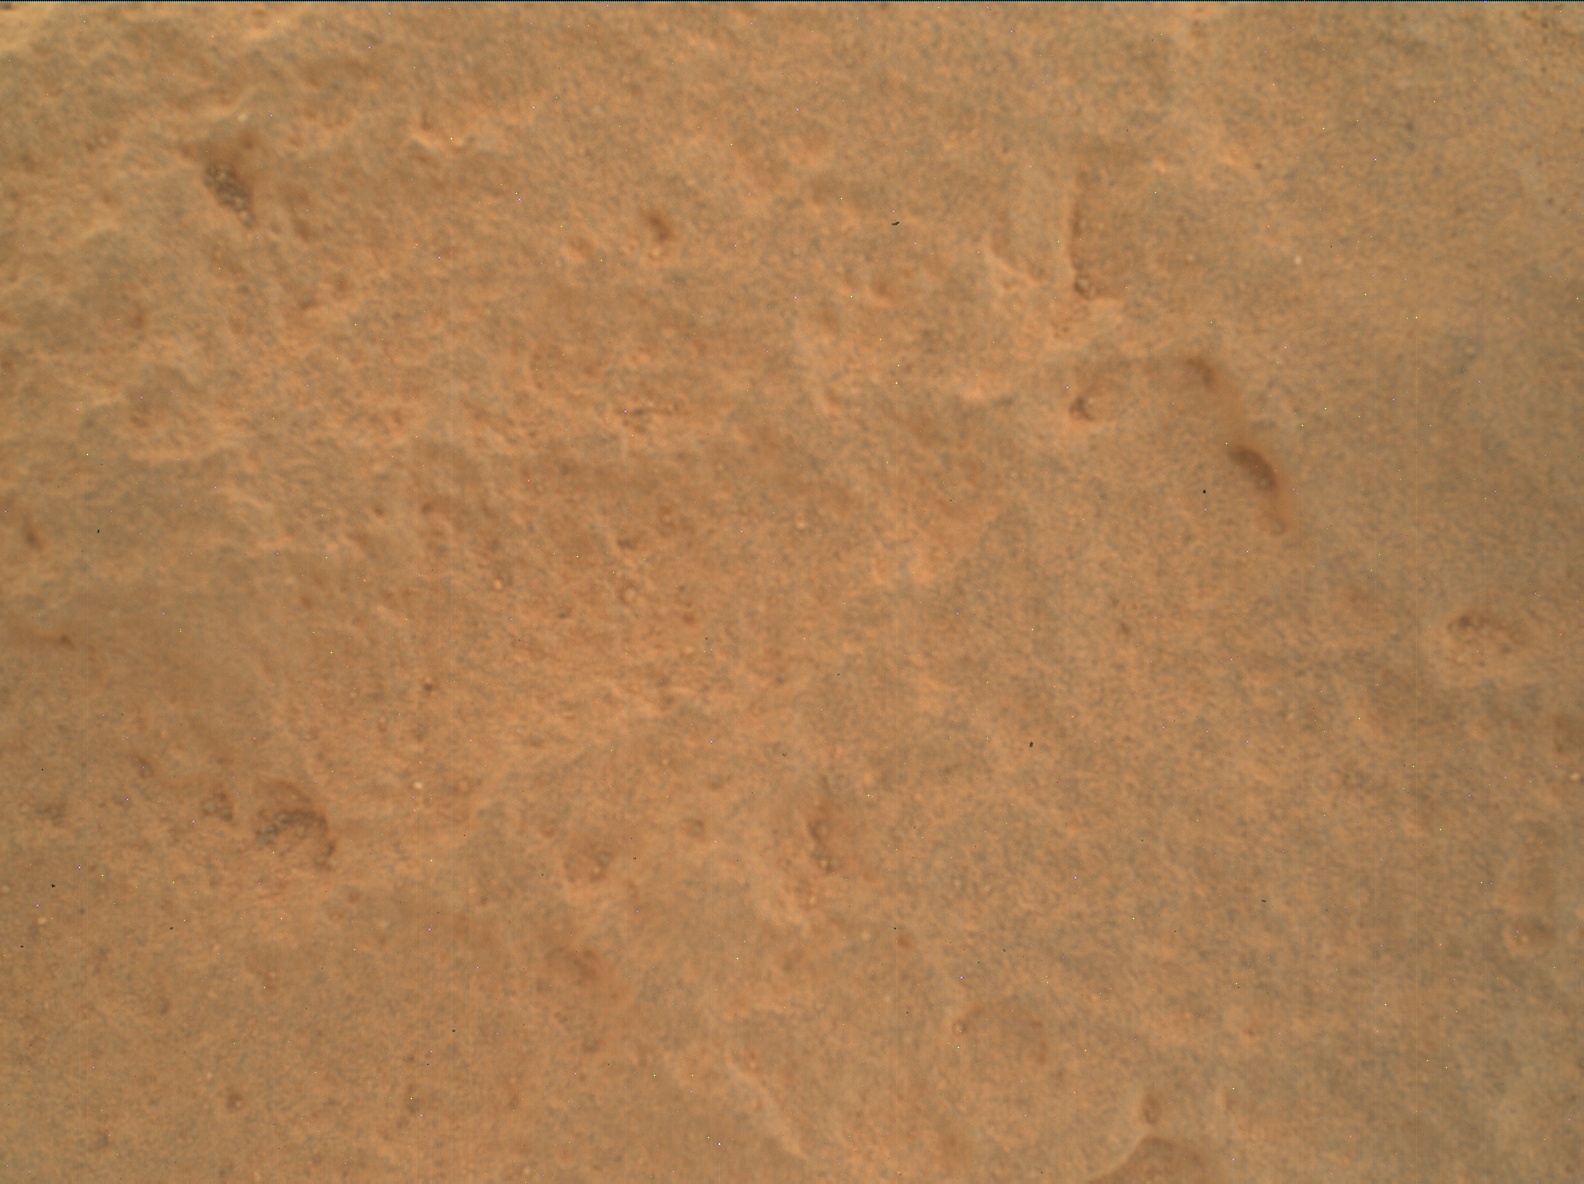 Nasa's Mars rover Curiosity acquired this image using its Mars Hand Lens Imager (MAHLI) on Sol 3449